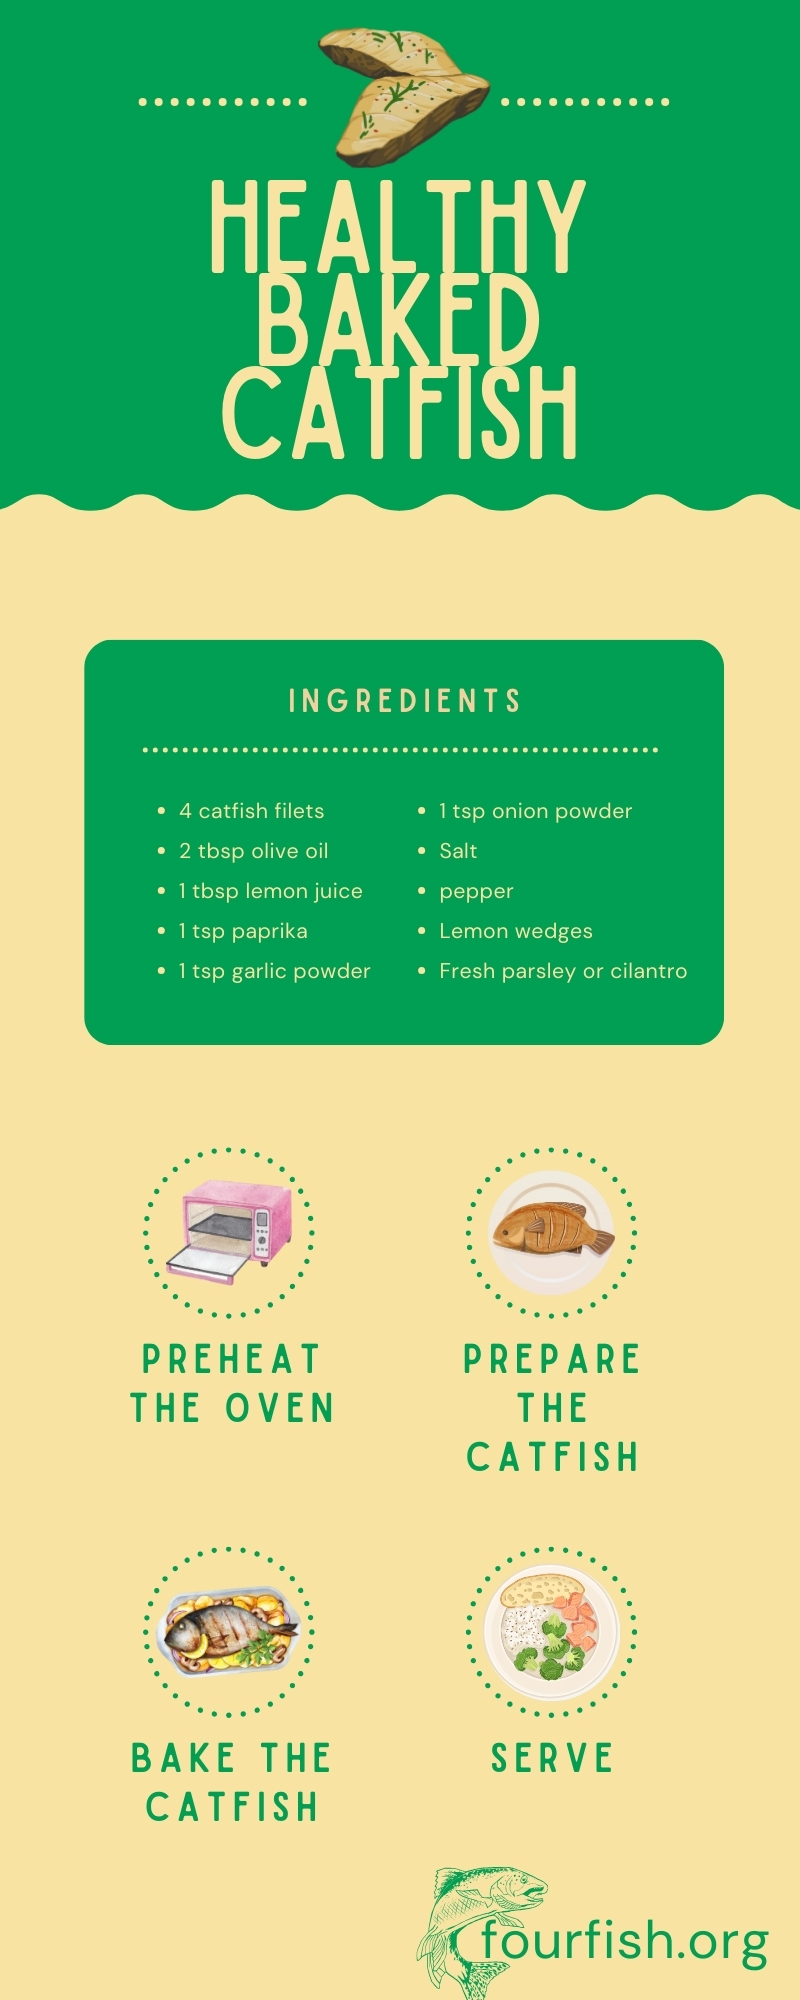 Healthy Baked Catfish Recipe Infographic